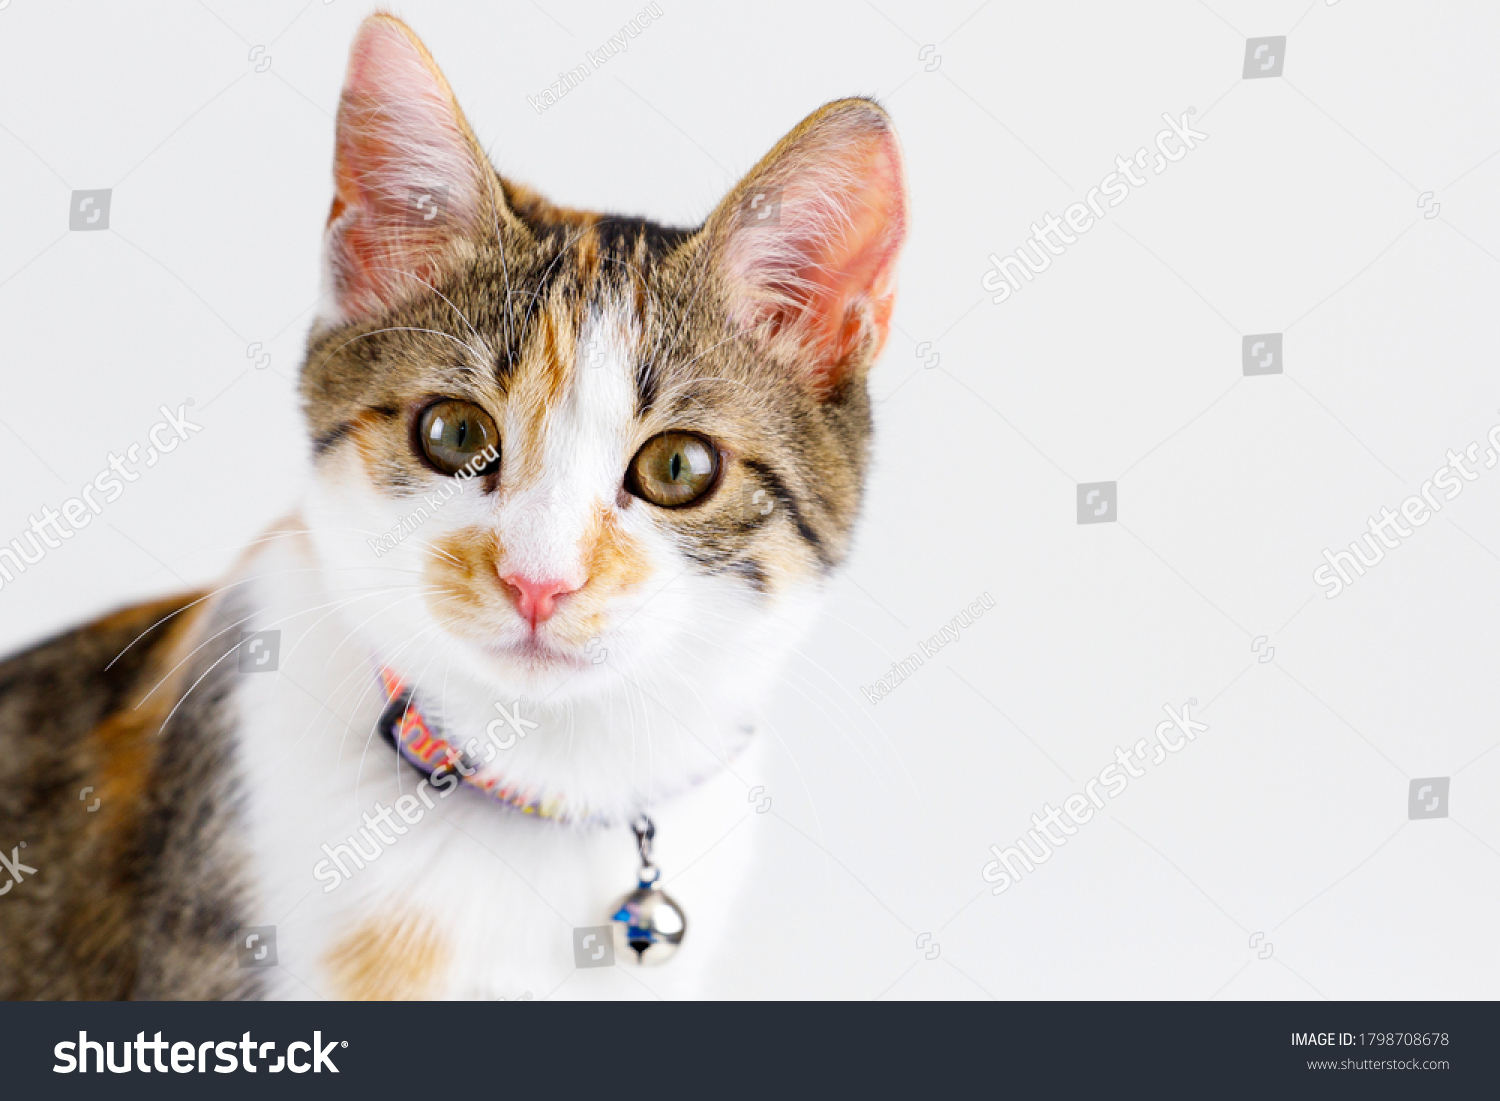 Ginger orange cat have collar and bell portrait studio on white background. #1798708678